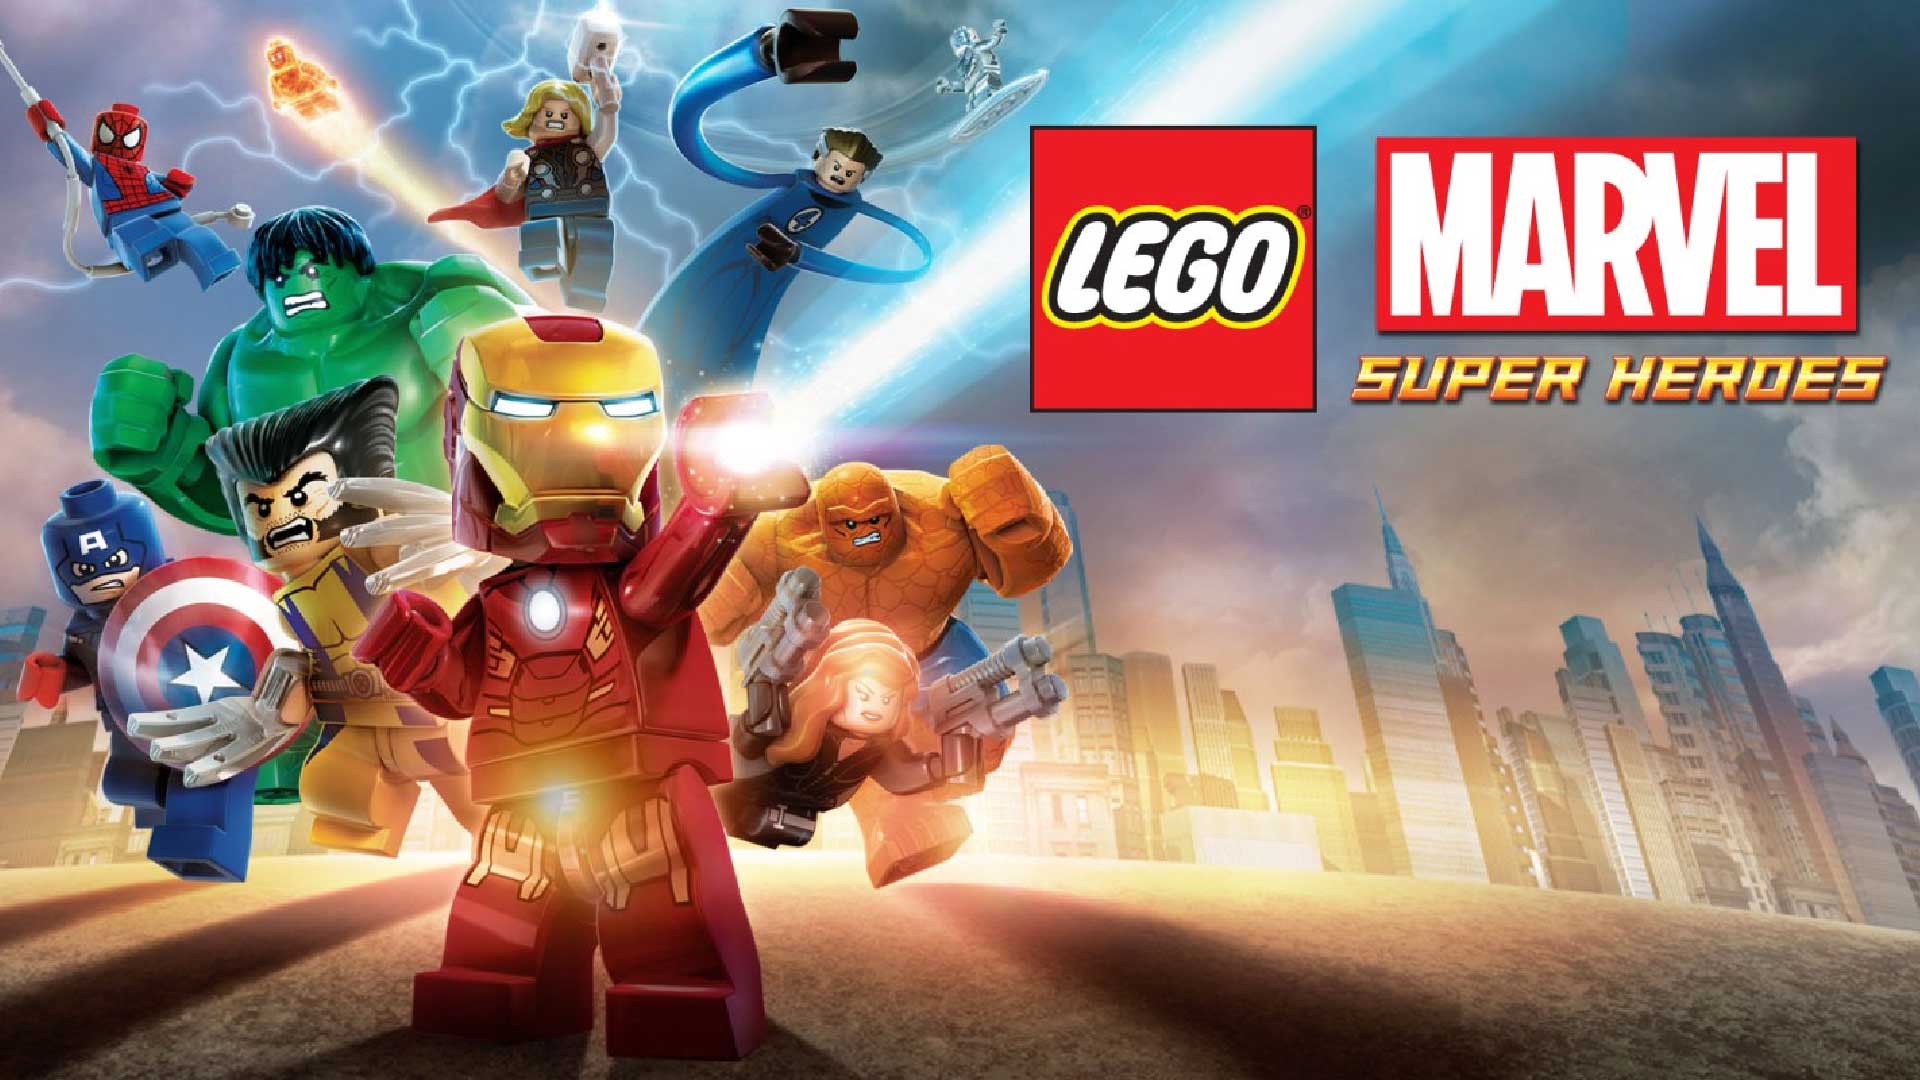 LEGO Marvel Super Heroes released for Nintendo Switch